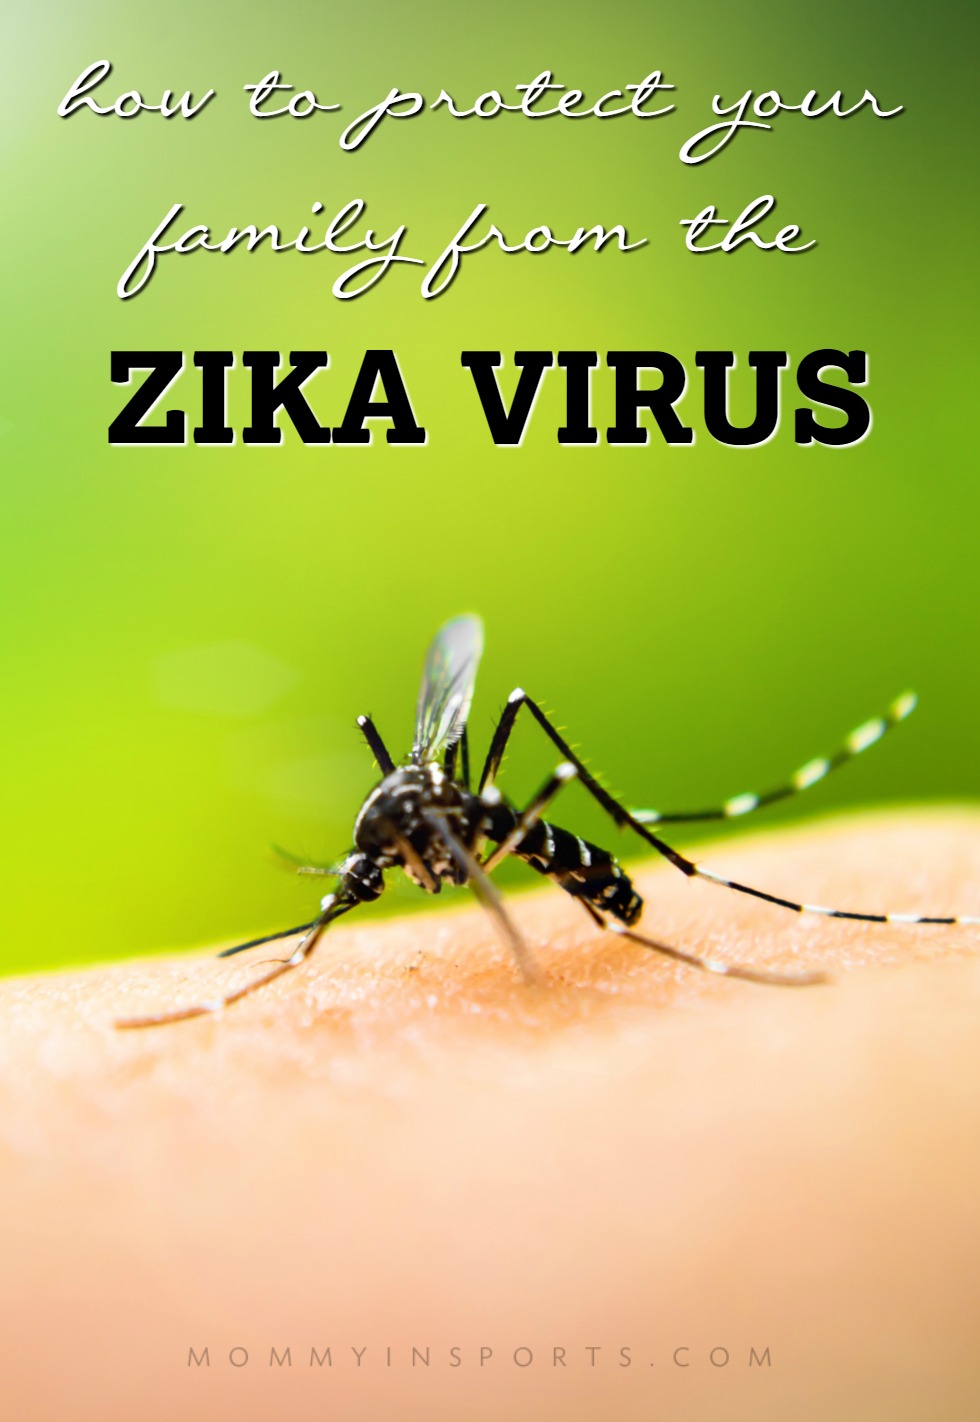 Worried about the Zika virus? Now that it's in the United States, you can take some precautions to protect your family from the Zika Virus!